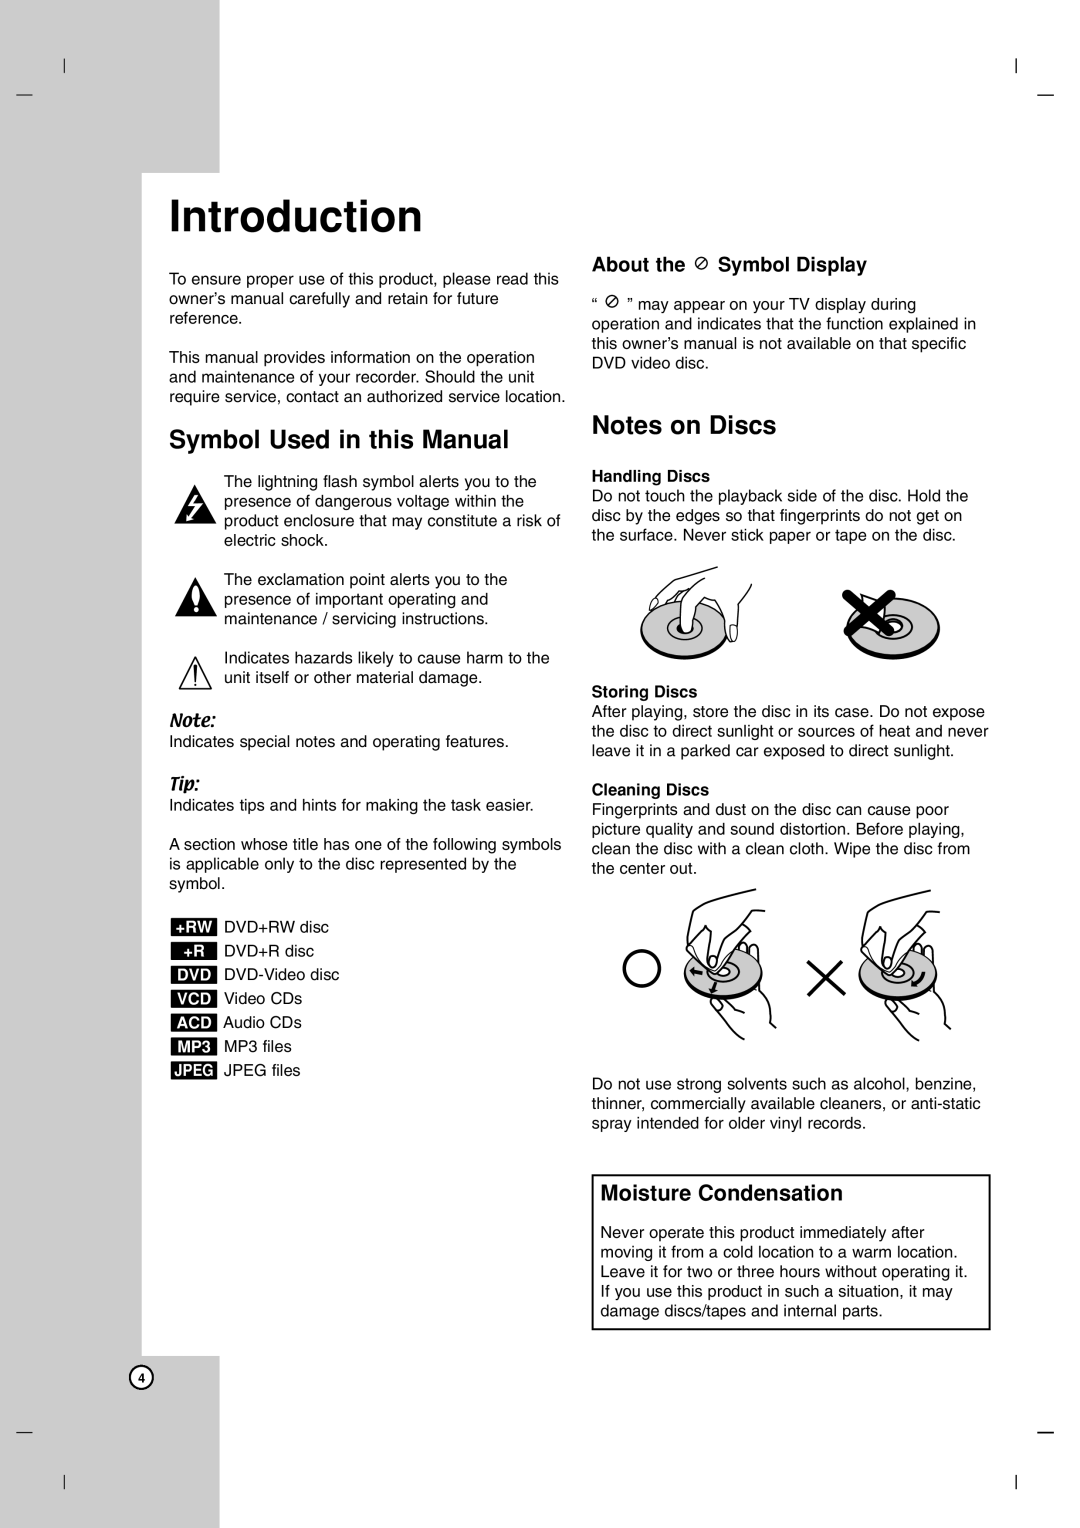 LG Electronics DR7400 Introduction, Symbol Used in this Manual, Notes on Discs, About the Symbol Display, Handling Discs 